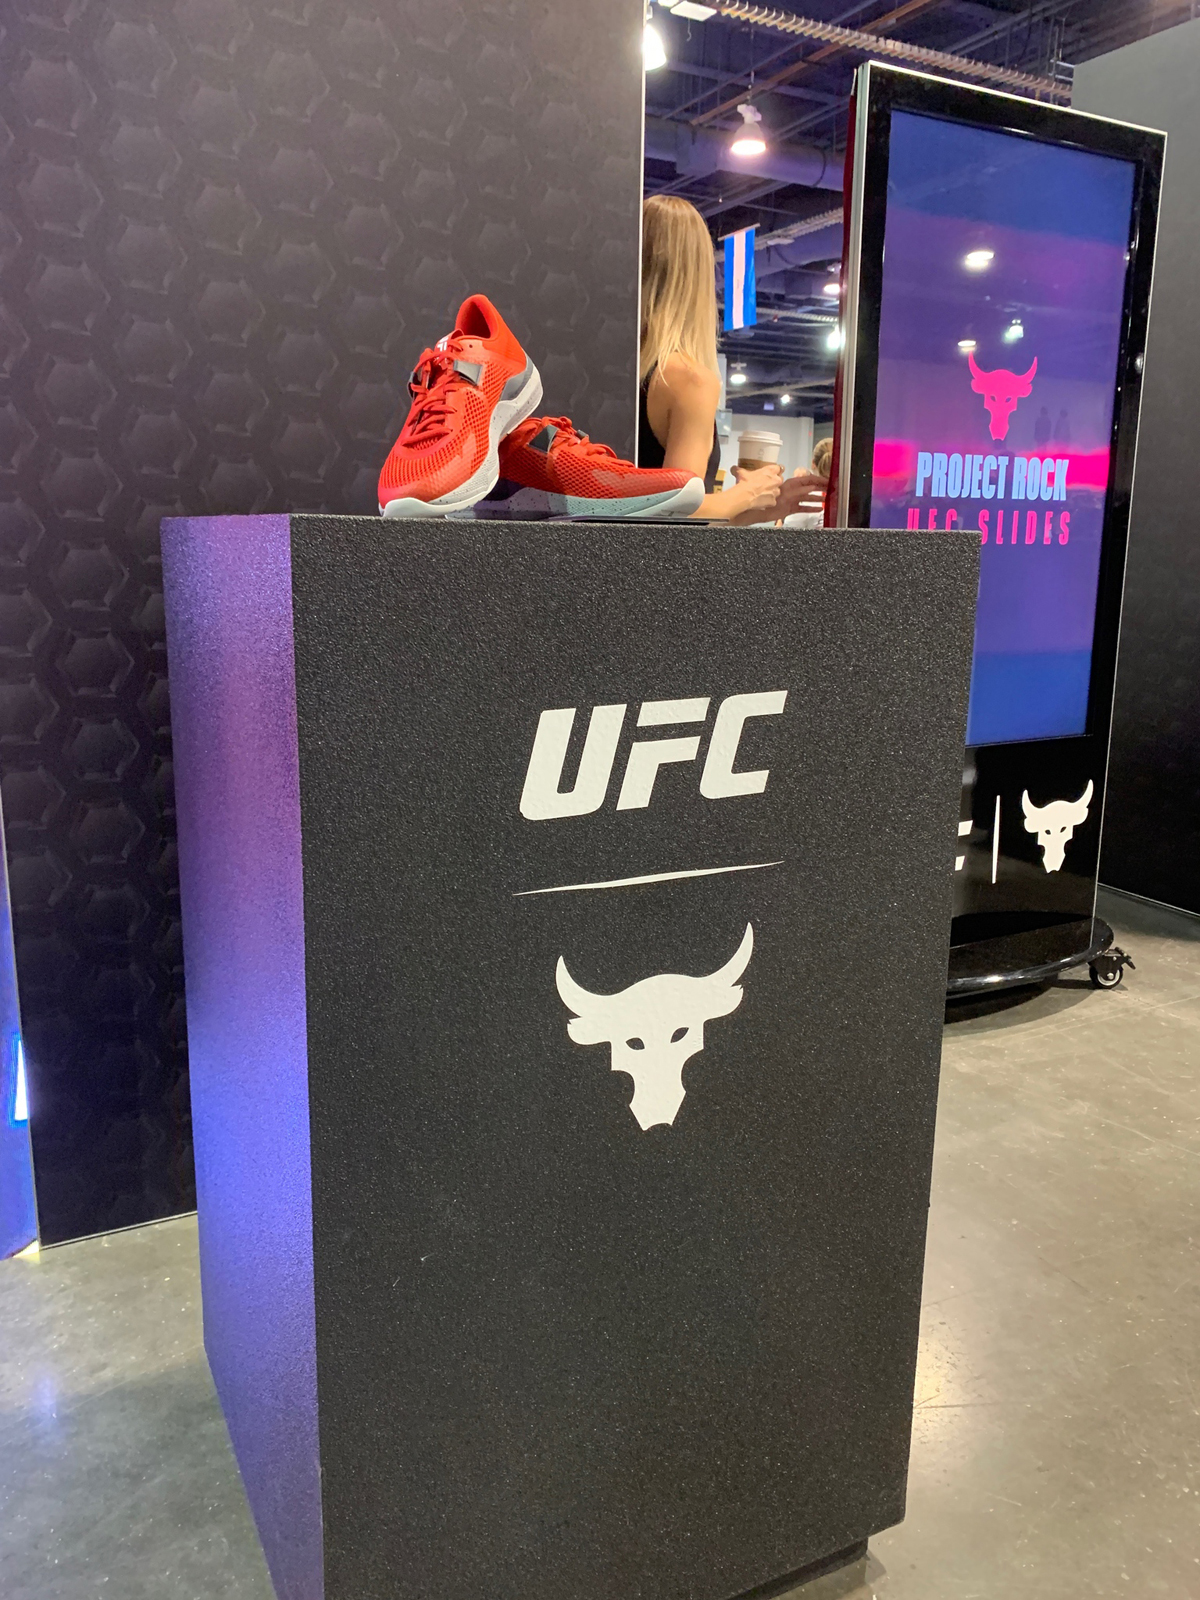 Project Rock x UFC BSR 2 Training Shoes Now Available